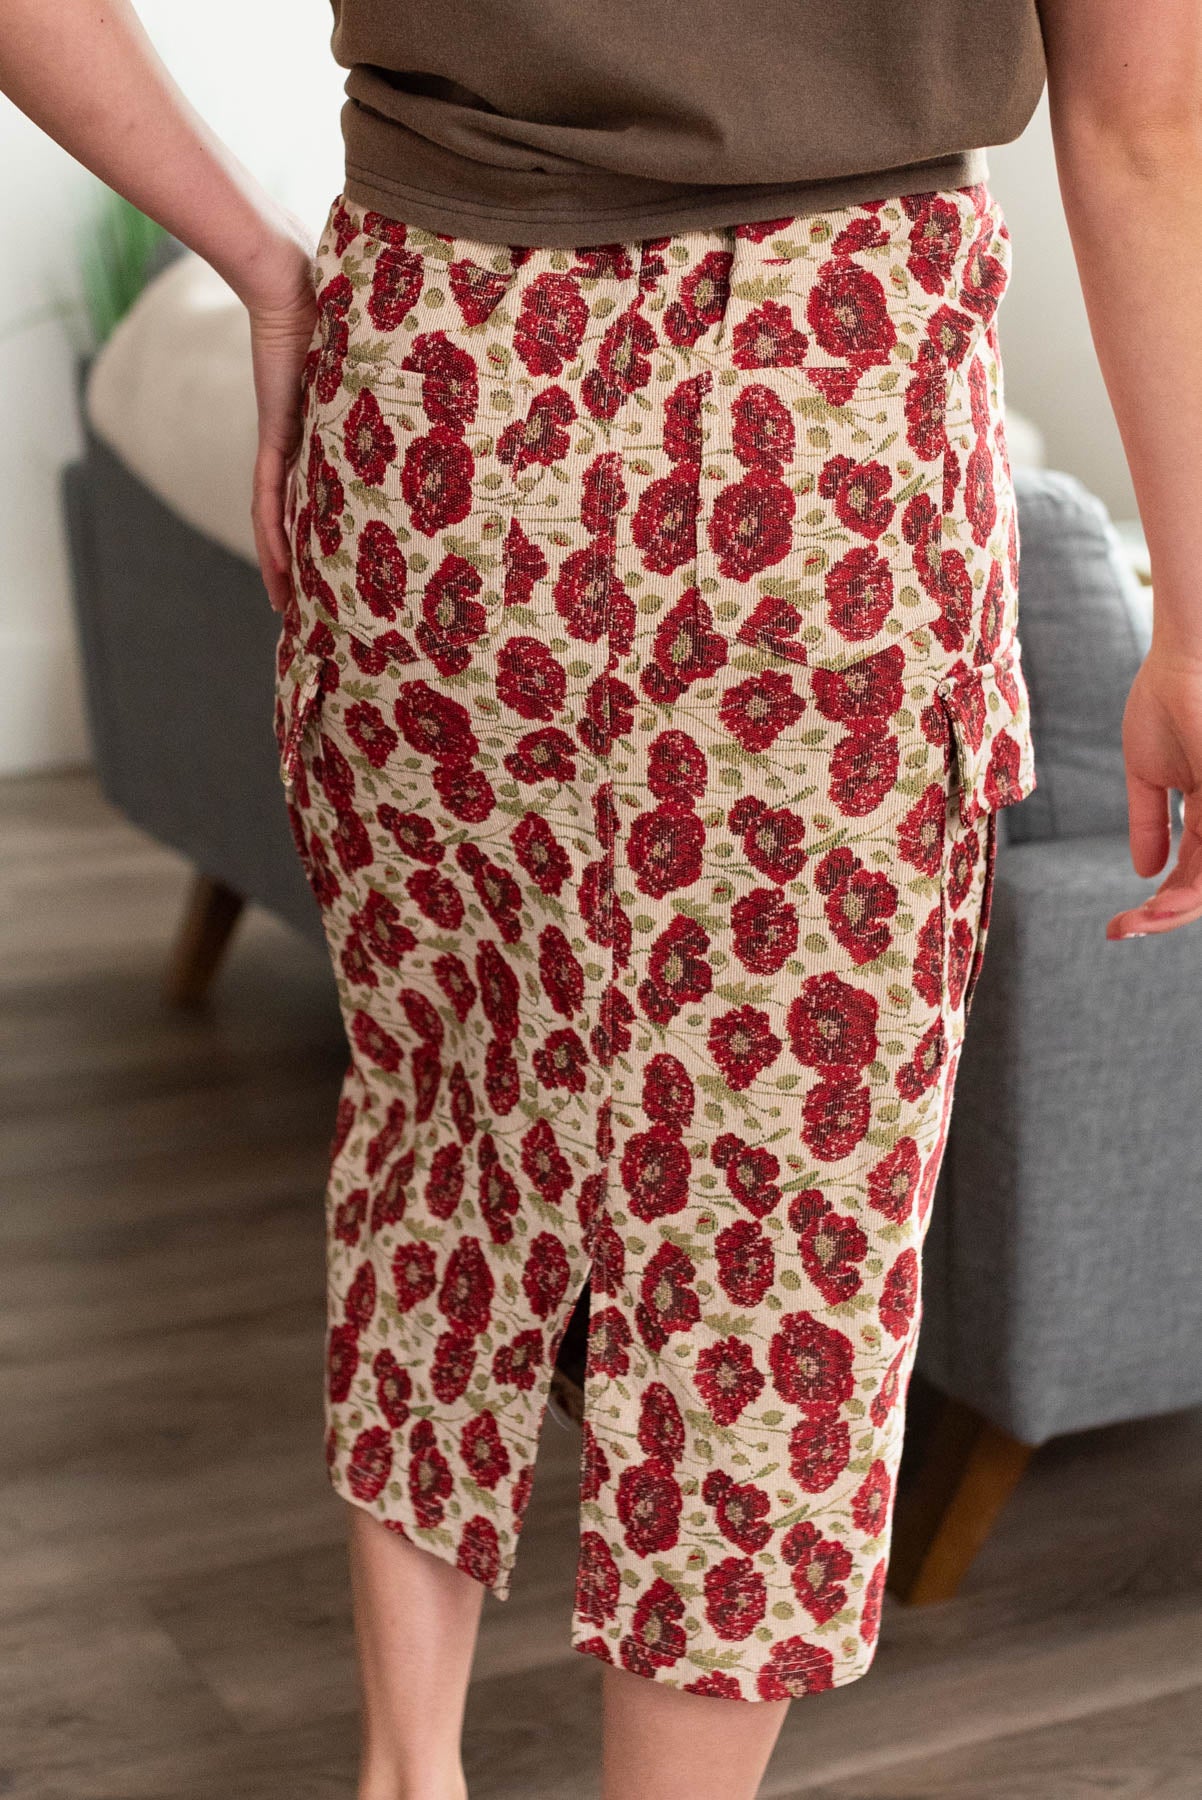 Back view of the red floral cargo skirt